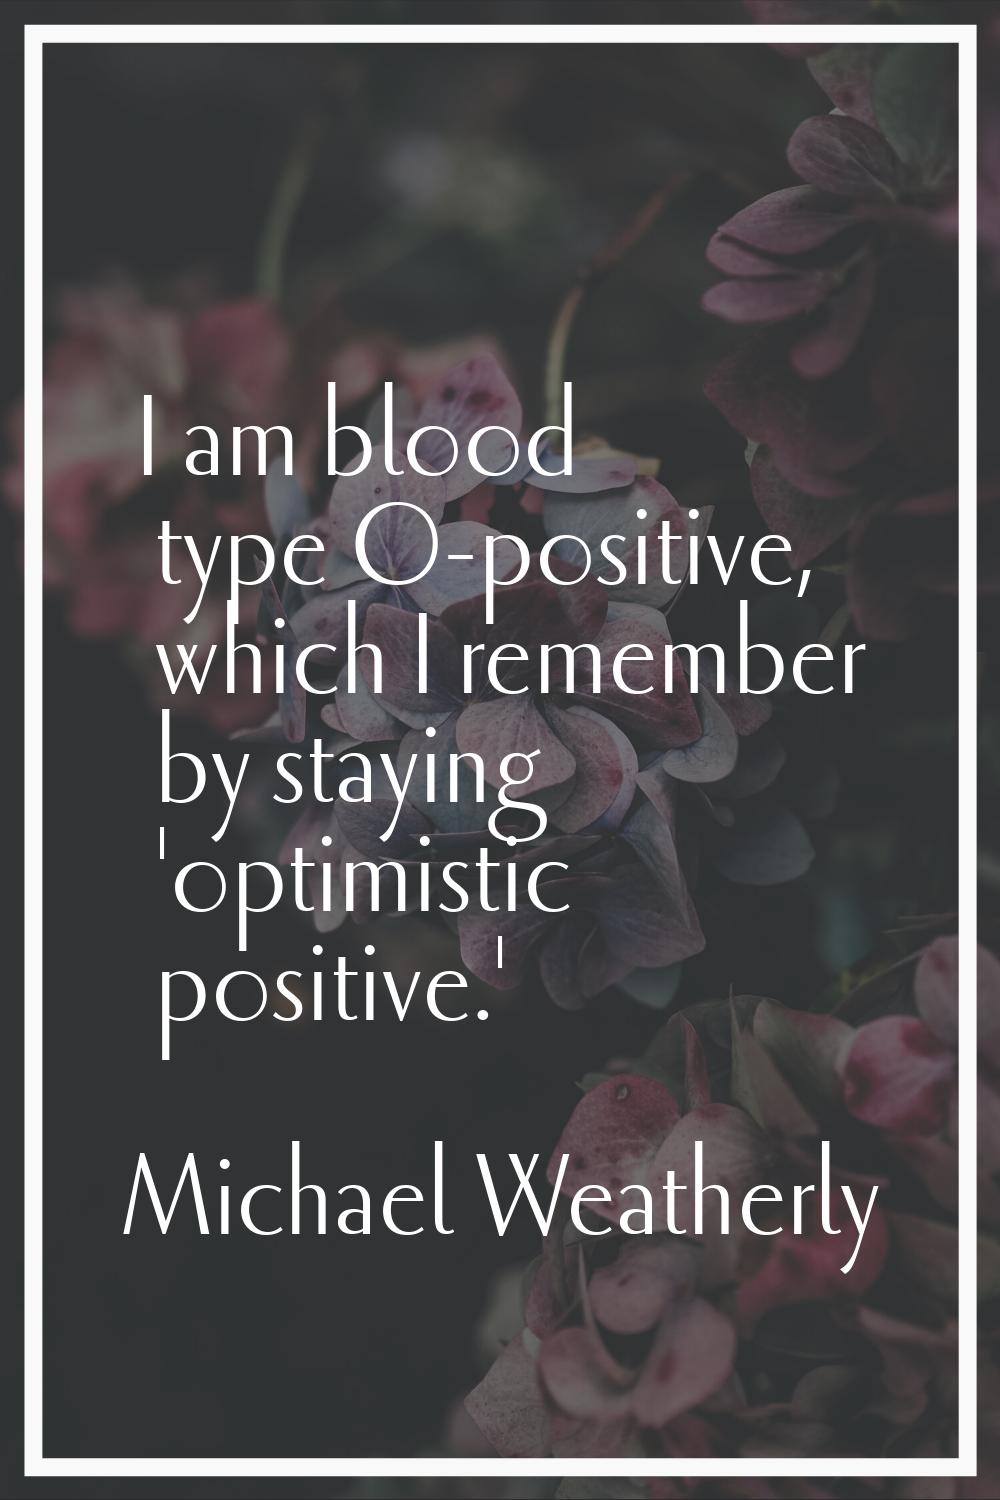 I am blood type O-positive, which I remember by staying 'optimistic positive.'